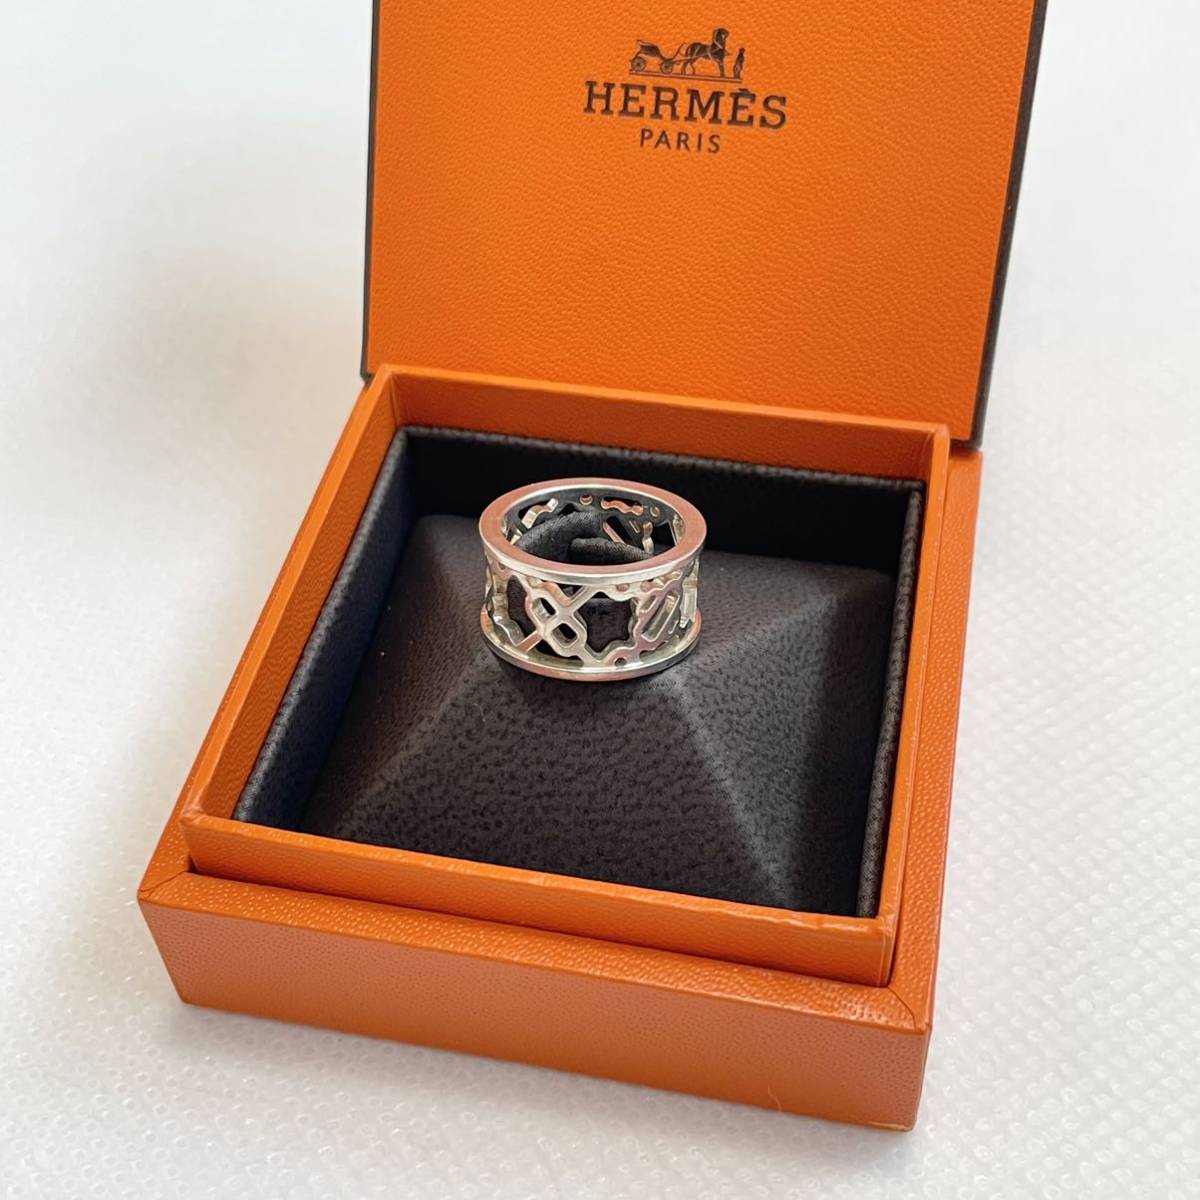 HERMES 49 Chaine d'Ancre Passerelle Ring 9号 シェーヌダンクル パスレル リング エルメス シルバー アクロバット クレッシェンド